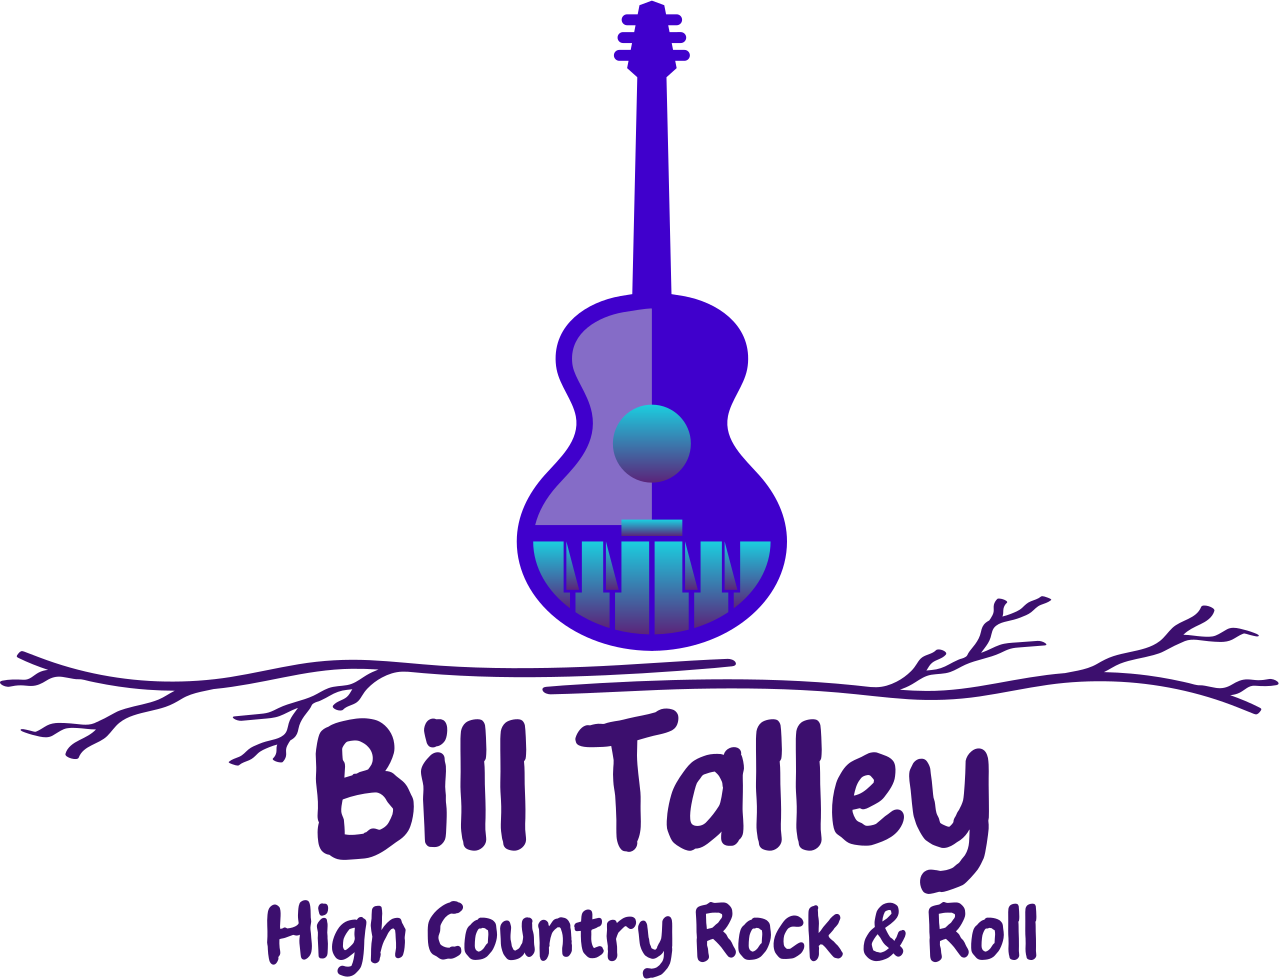 Bill Talley's web page